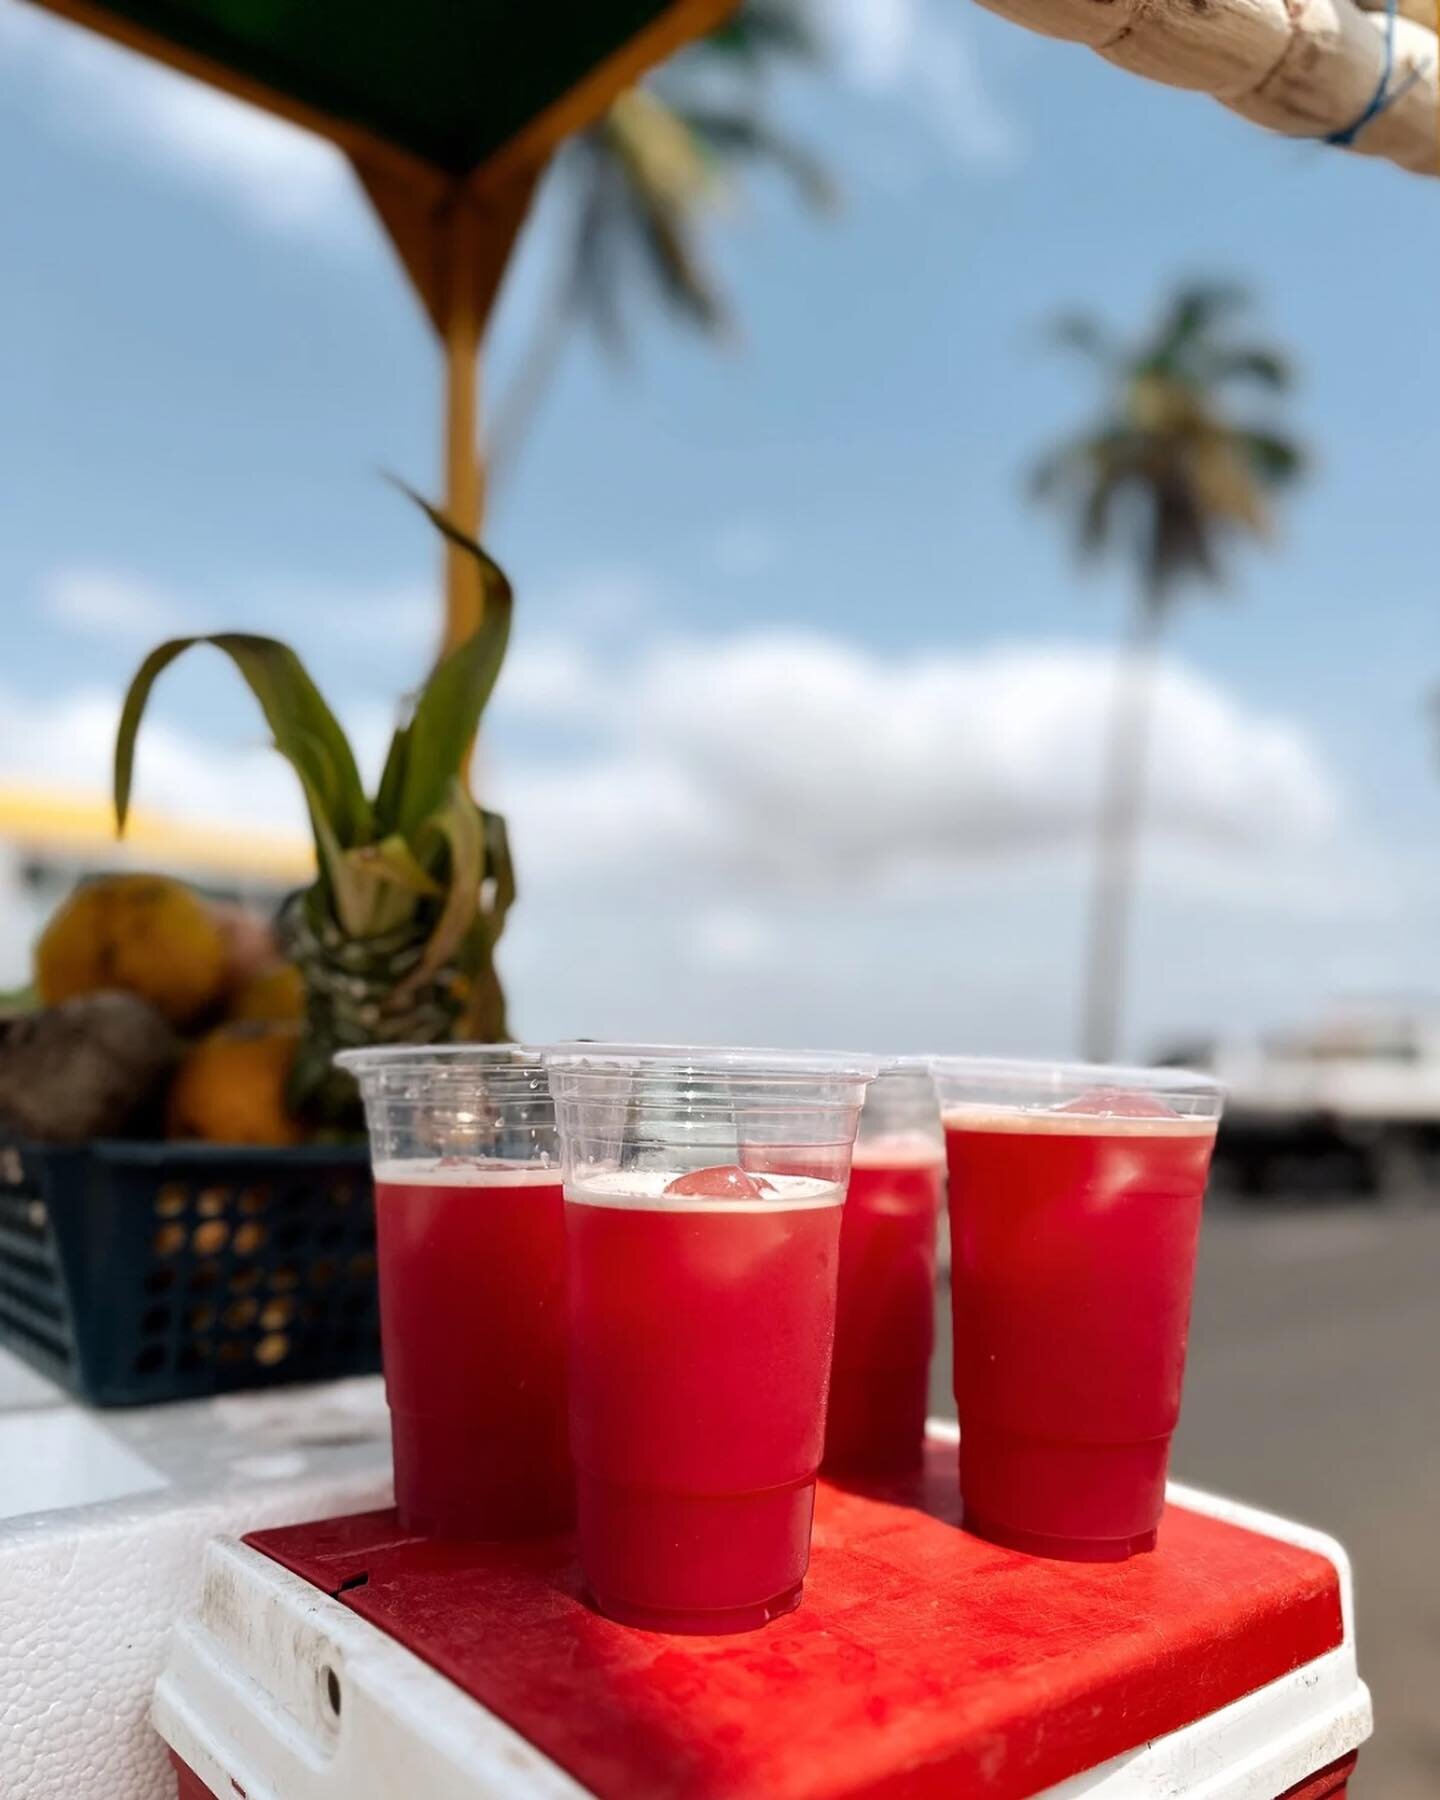 Highlights from our first Adventure Trip 🤍

+ Walking tour of Maputo, visiting landmarks and the artisan market, and enjoying cana doce juice.
+ Visiting and playing with the preschoolers.
+ Beach time on the Indian Ocean.
+ Trying new and exciting 